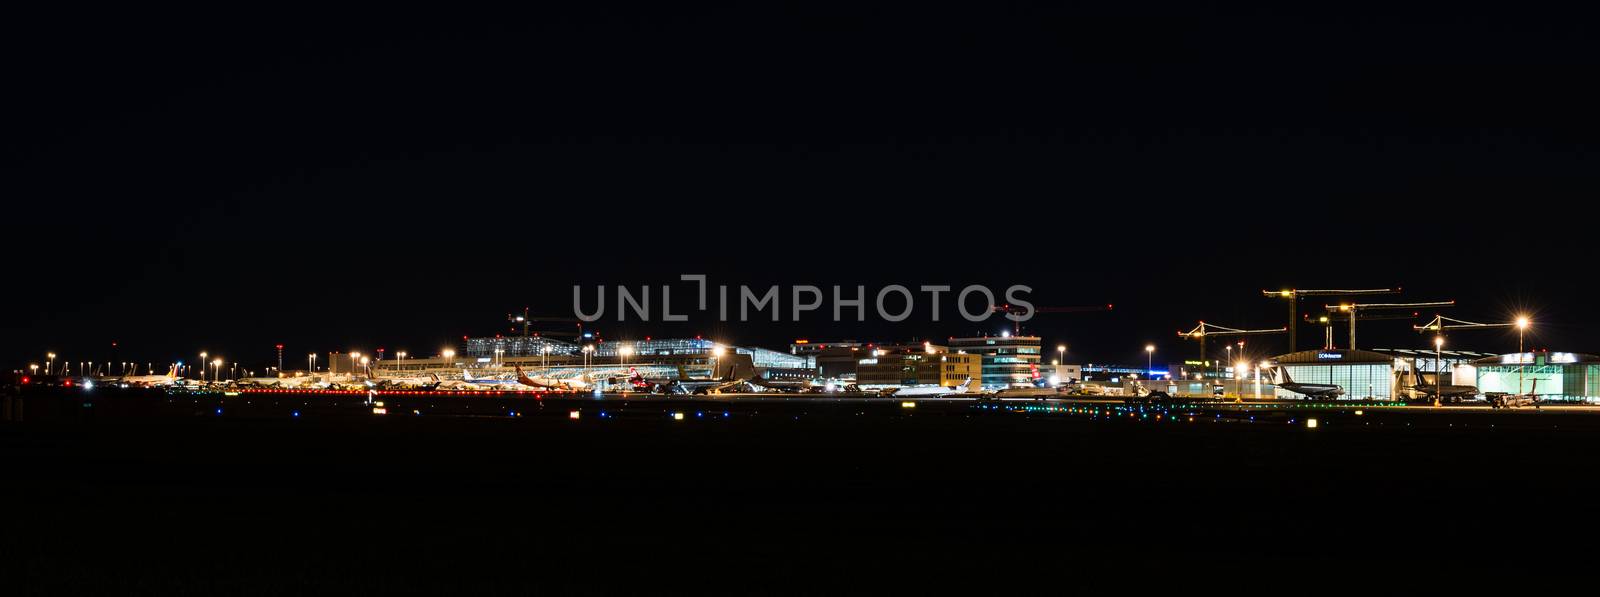 STUTTGART, GERMANY - MAY 6, 2014: Wide angle shot of Stuttgart Airport at dusk with planes departing and arriving as seen from over the fields on May, 6, 2014 in Stuttgart, Germany. Stuttgart Airport is the 6th biggest airport in Germany, having a capacity of 14 million people per year.